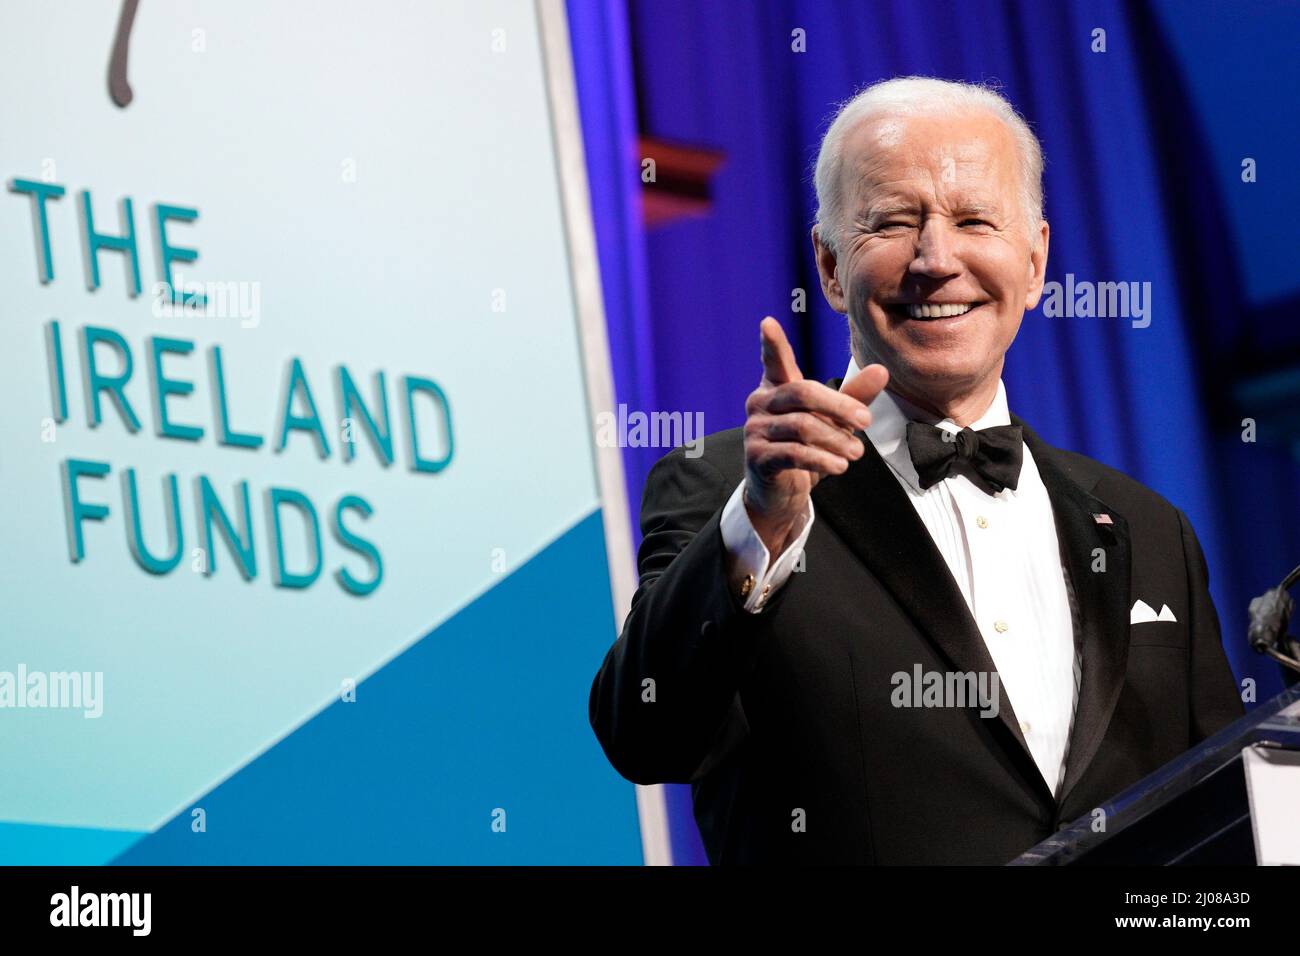 United States President Joe Biden delivers remarks at The Ireland Funds 30th National Gala in the  National Building Museum in Washington on March 16, 2022. Credit: Yuri Gripas / Pool via CNP /MediaPunch Stock Photo